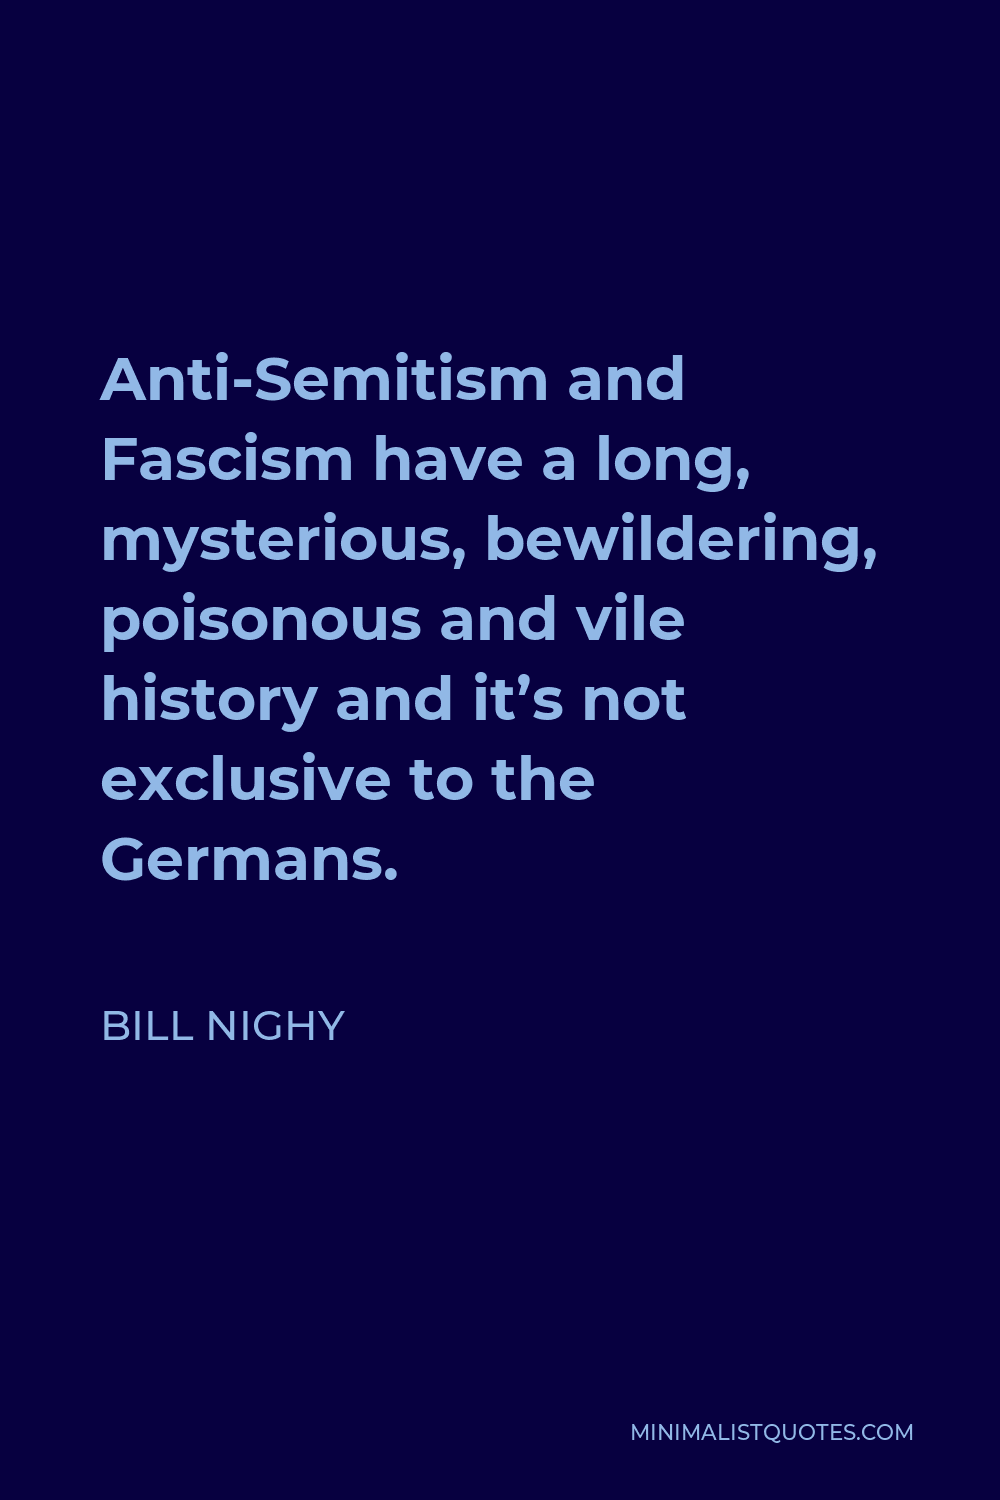 Bill Nighy Quote - Anti-Semitism and Fascism have a long, mysterious, bewildering, poisonous and vile history and it’s not exclusive to the Germans.